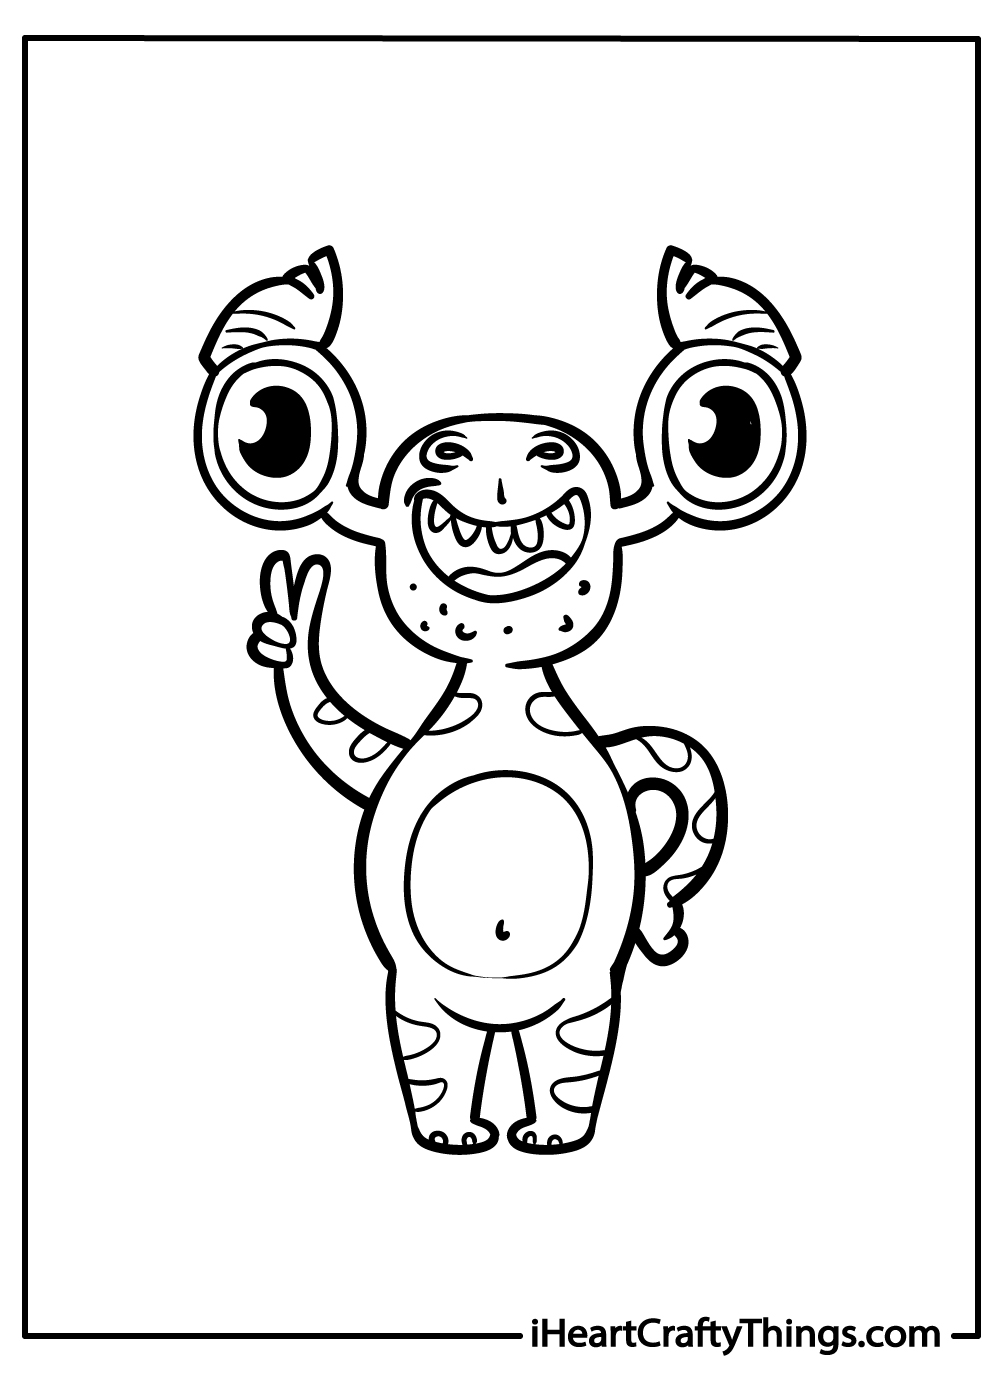 Alien Coloring Pages for Kids